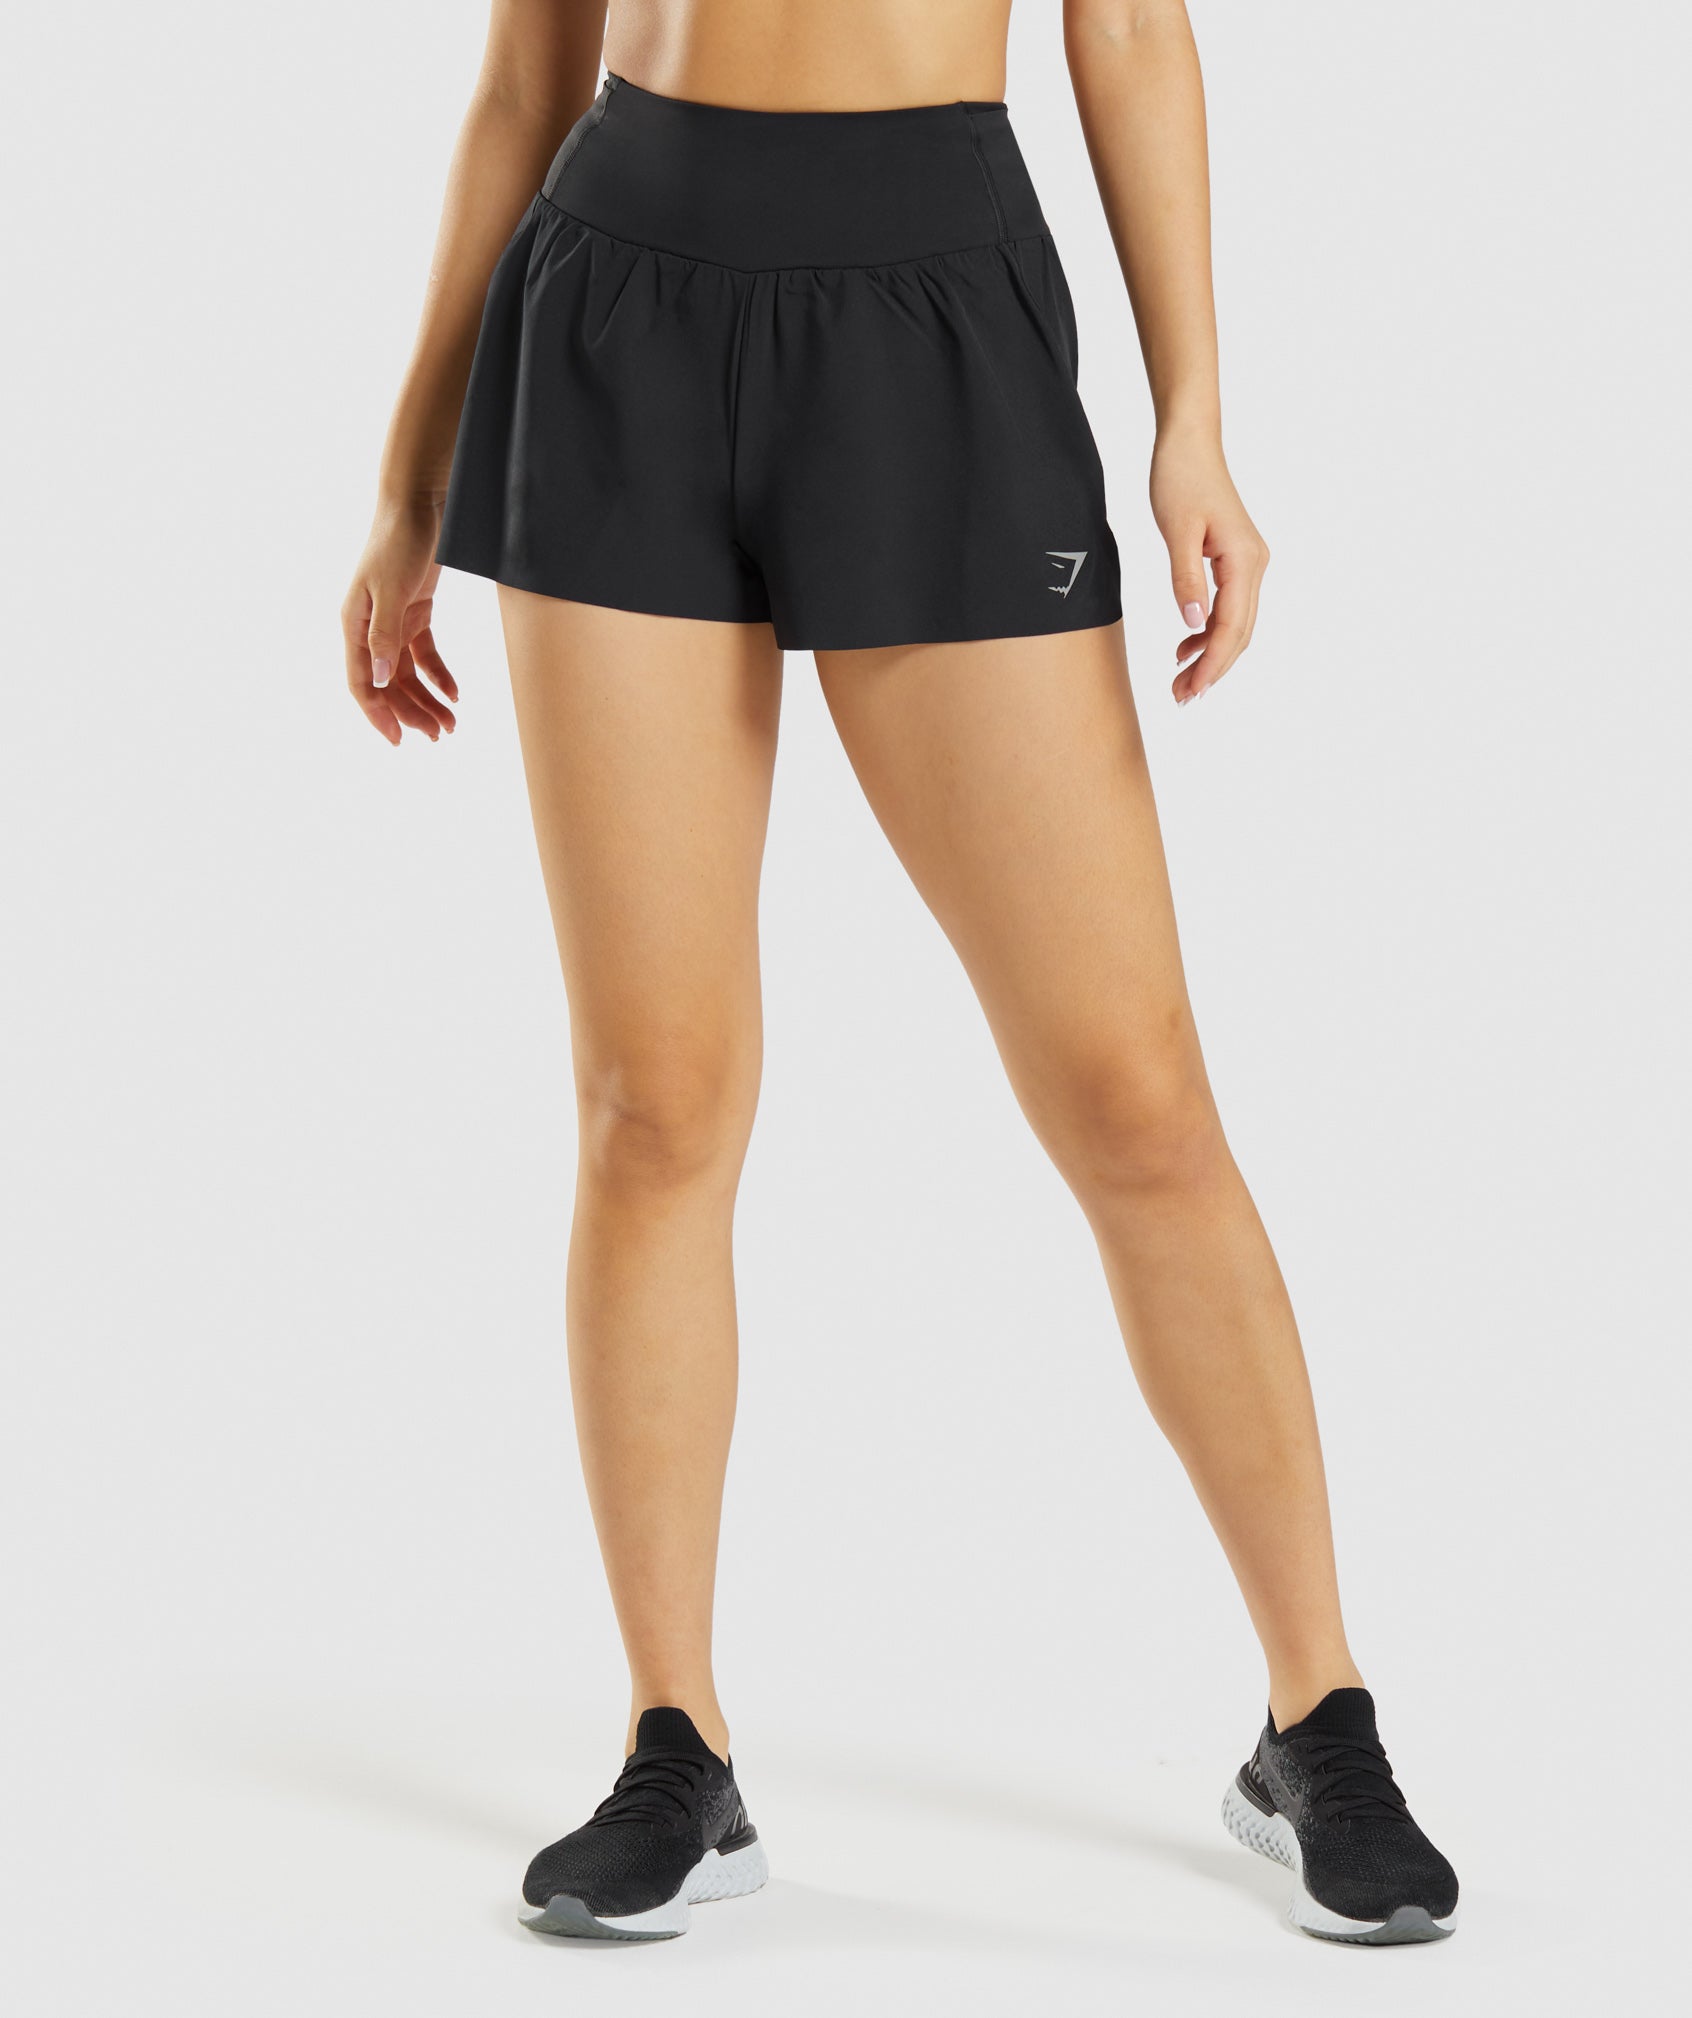 Speed Shorts in Black - view 1